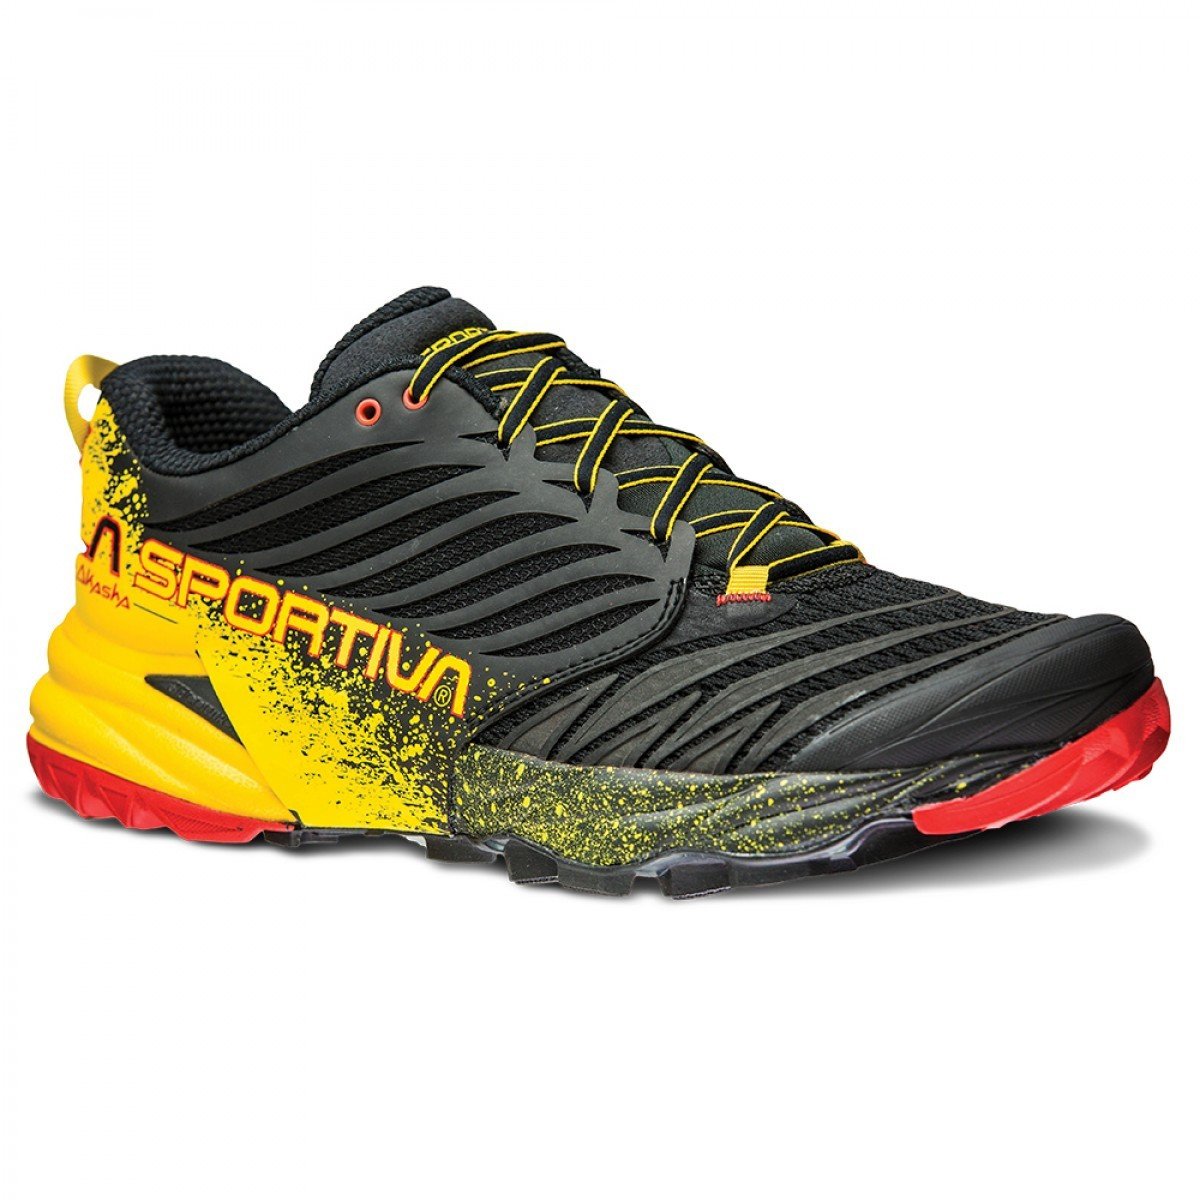 La Sportiva Akasha running shoe, outer side view in Black/Yellow/red colours